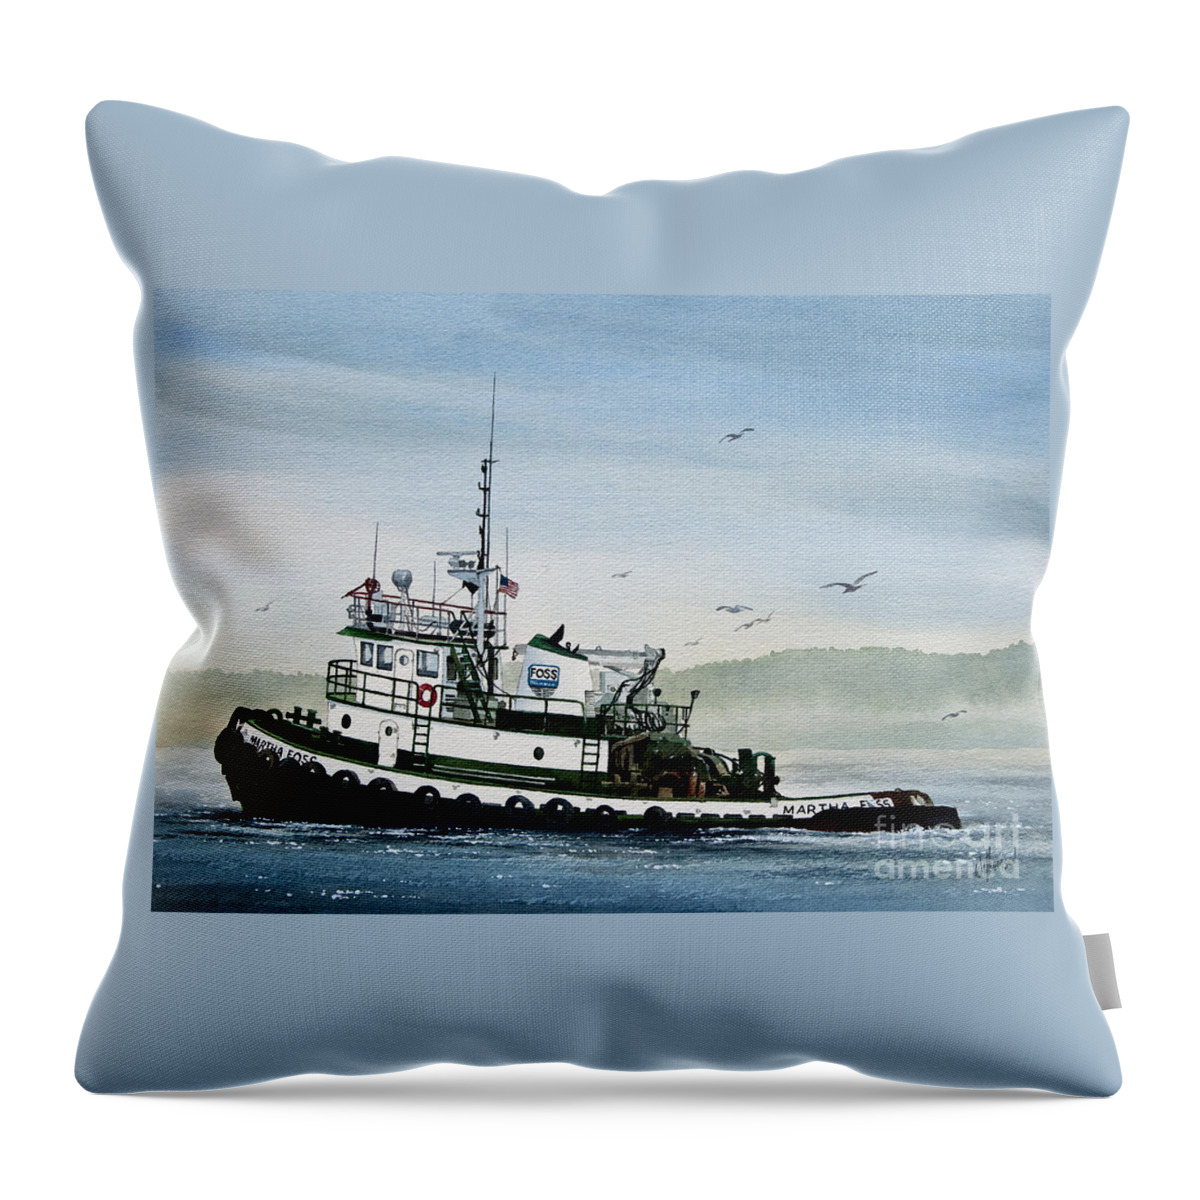 Tugs Throw Pillow featuring the painting FOSS Tugboat MARTHA FOSS by James Williamson